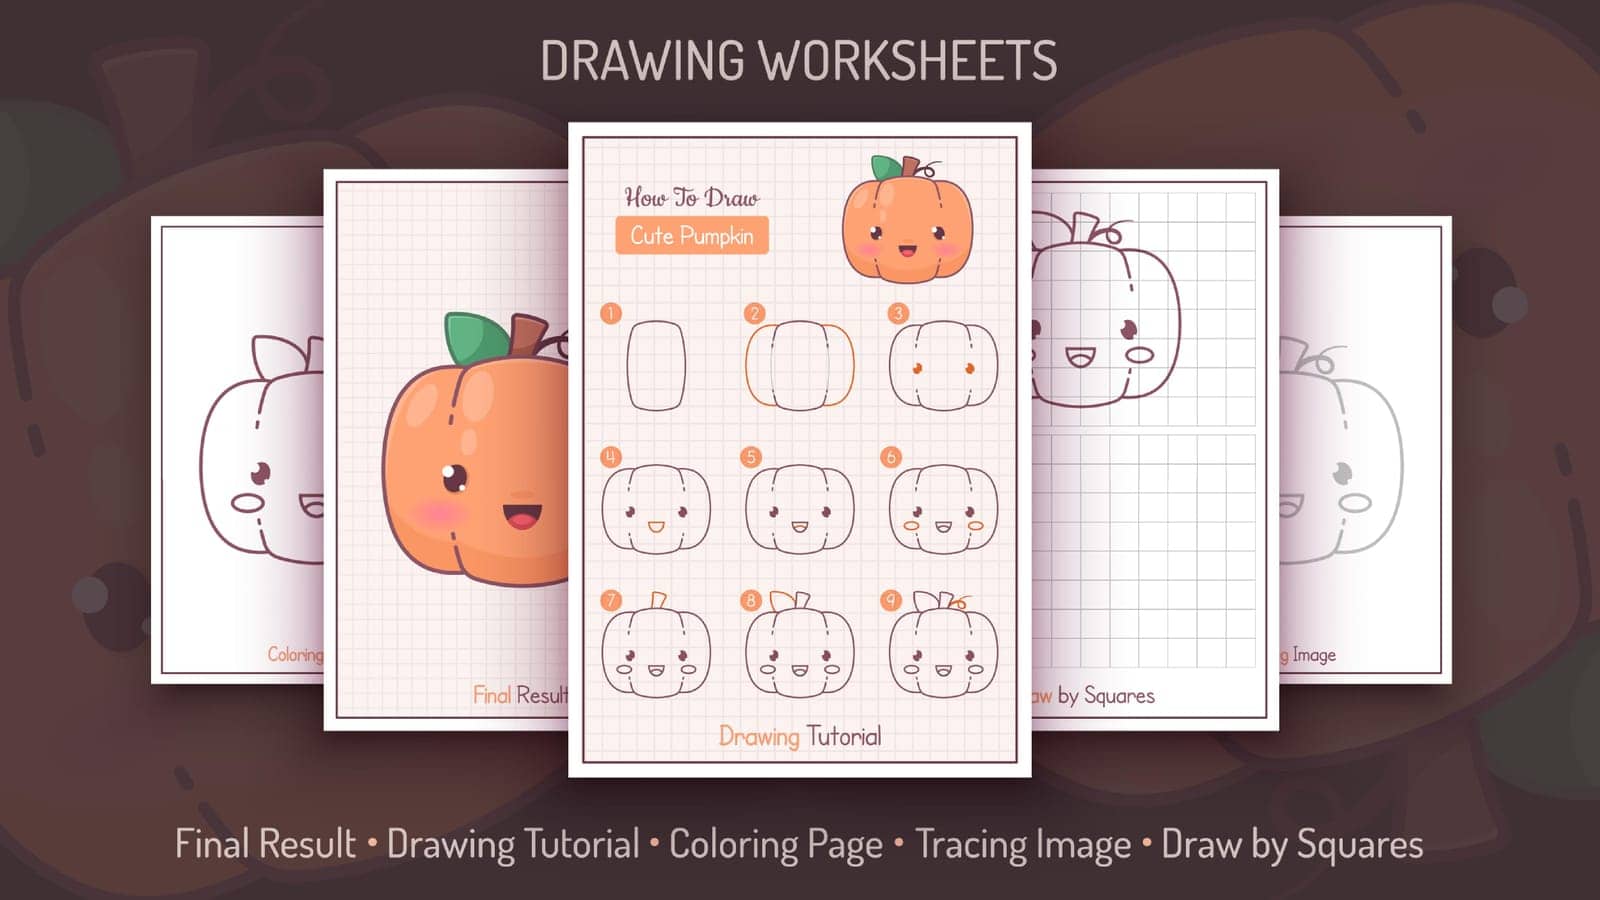 How to Draw a Pumpkin. Step by Step Drawing Tutorial. Draw Guide. Simple Instruction. Coloring Page. Worksheets for Kids and Adults. Vector eps 10.